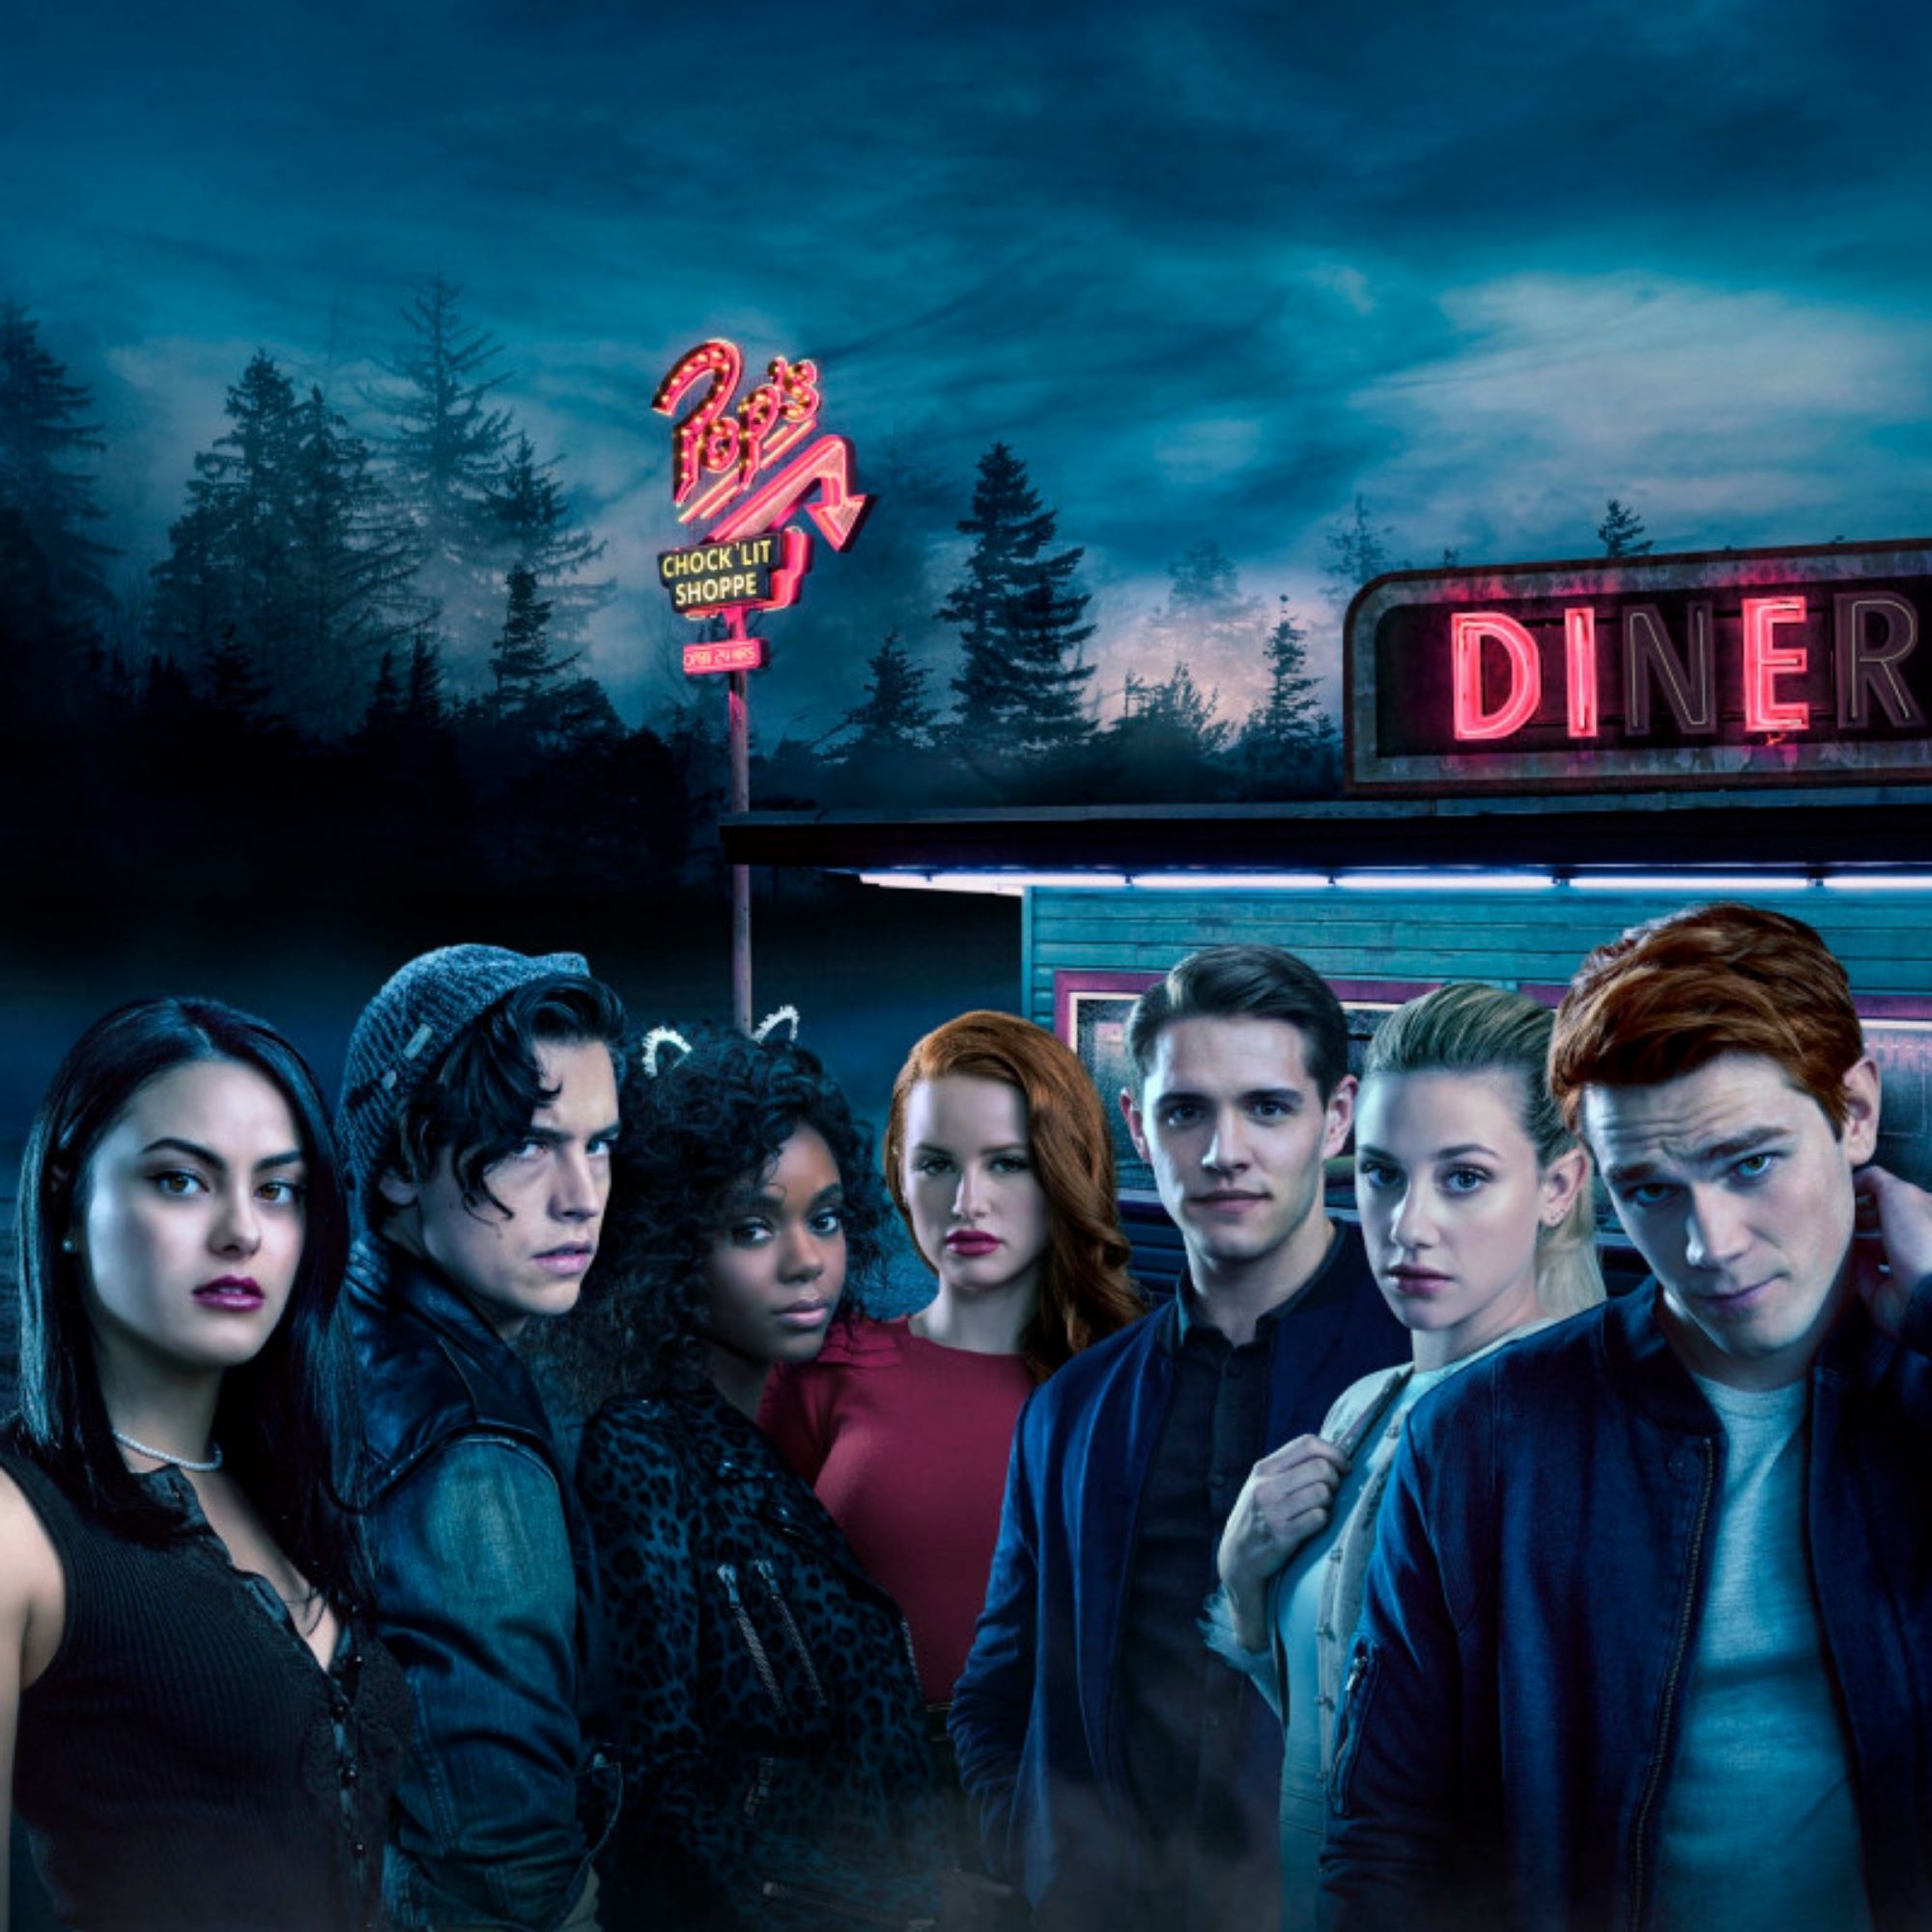 Who Has Died on 'Riverdale'? Complete Guide to Character Deaths